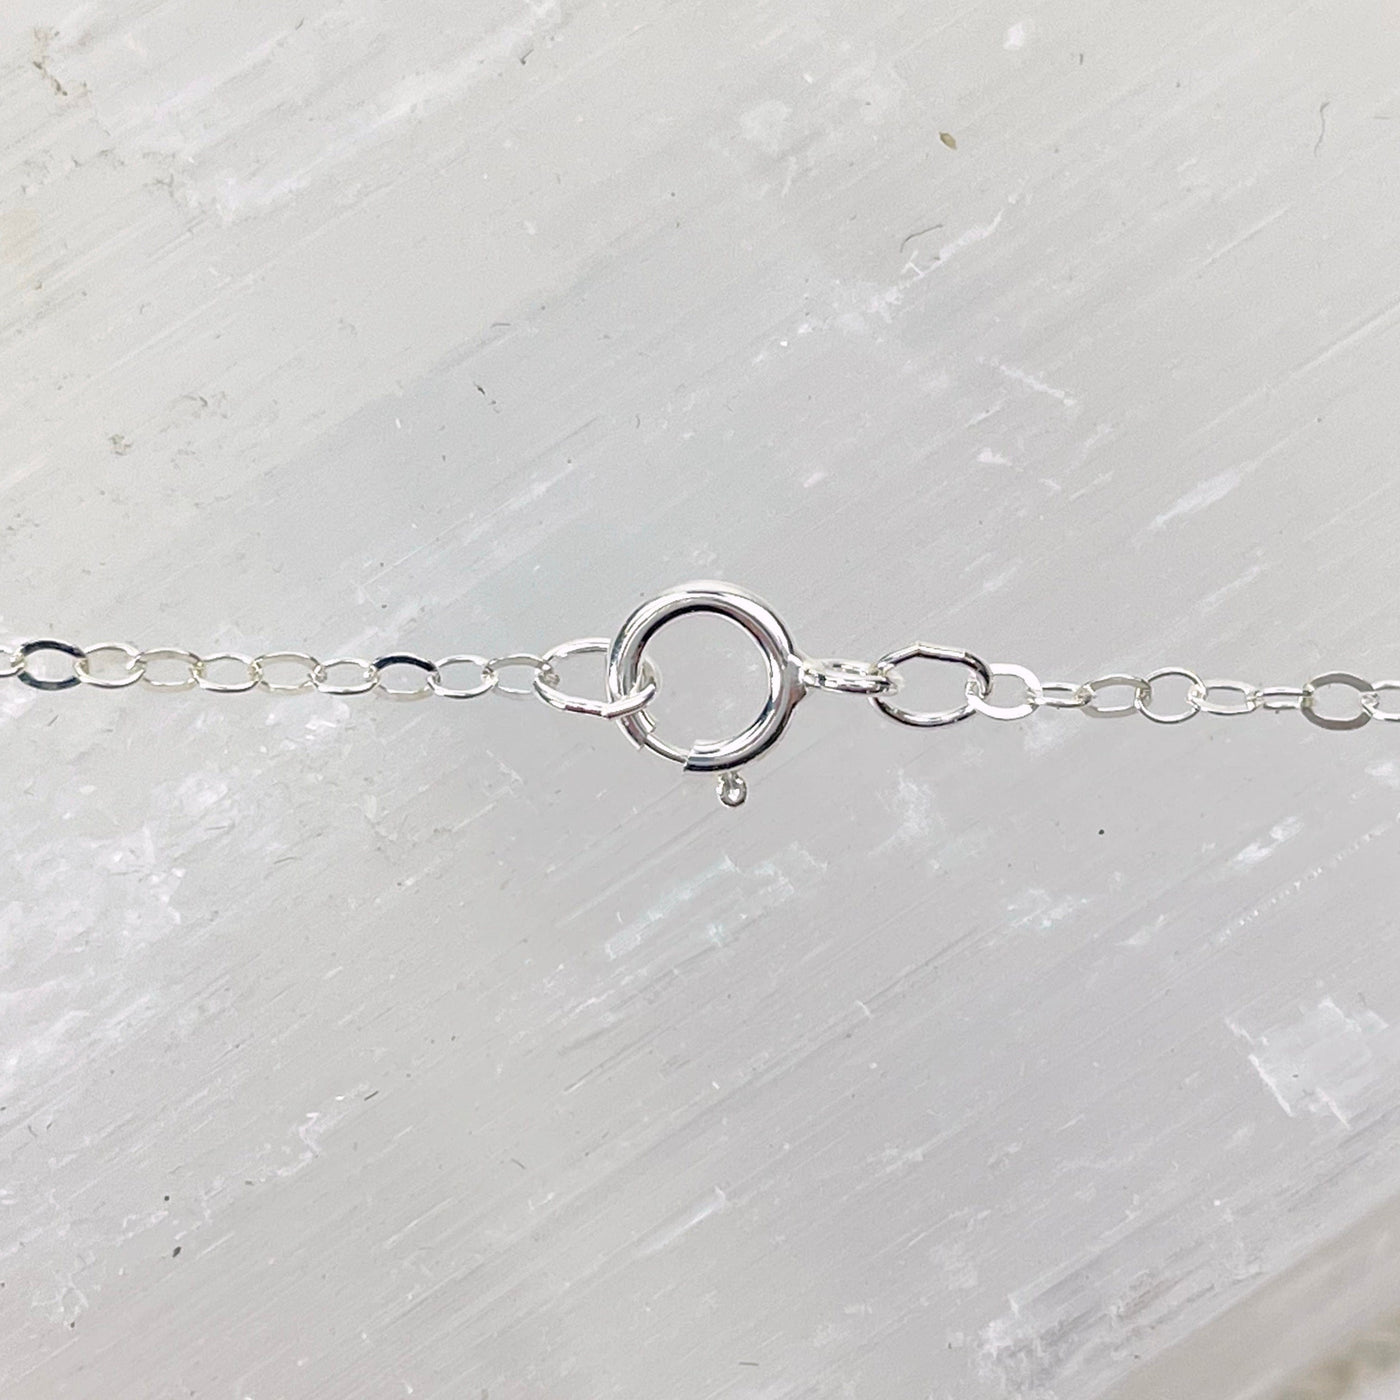 close up of silver electroplated chain and clasp